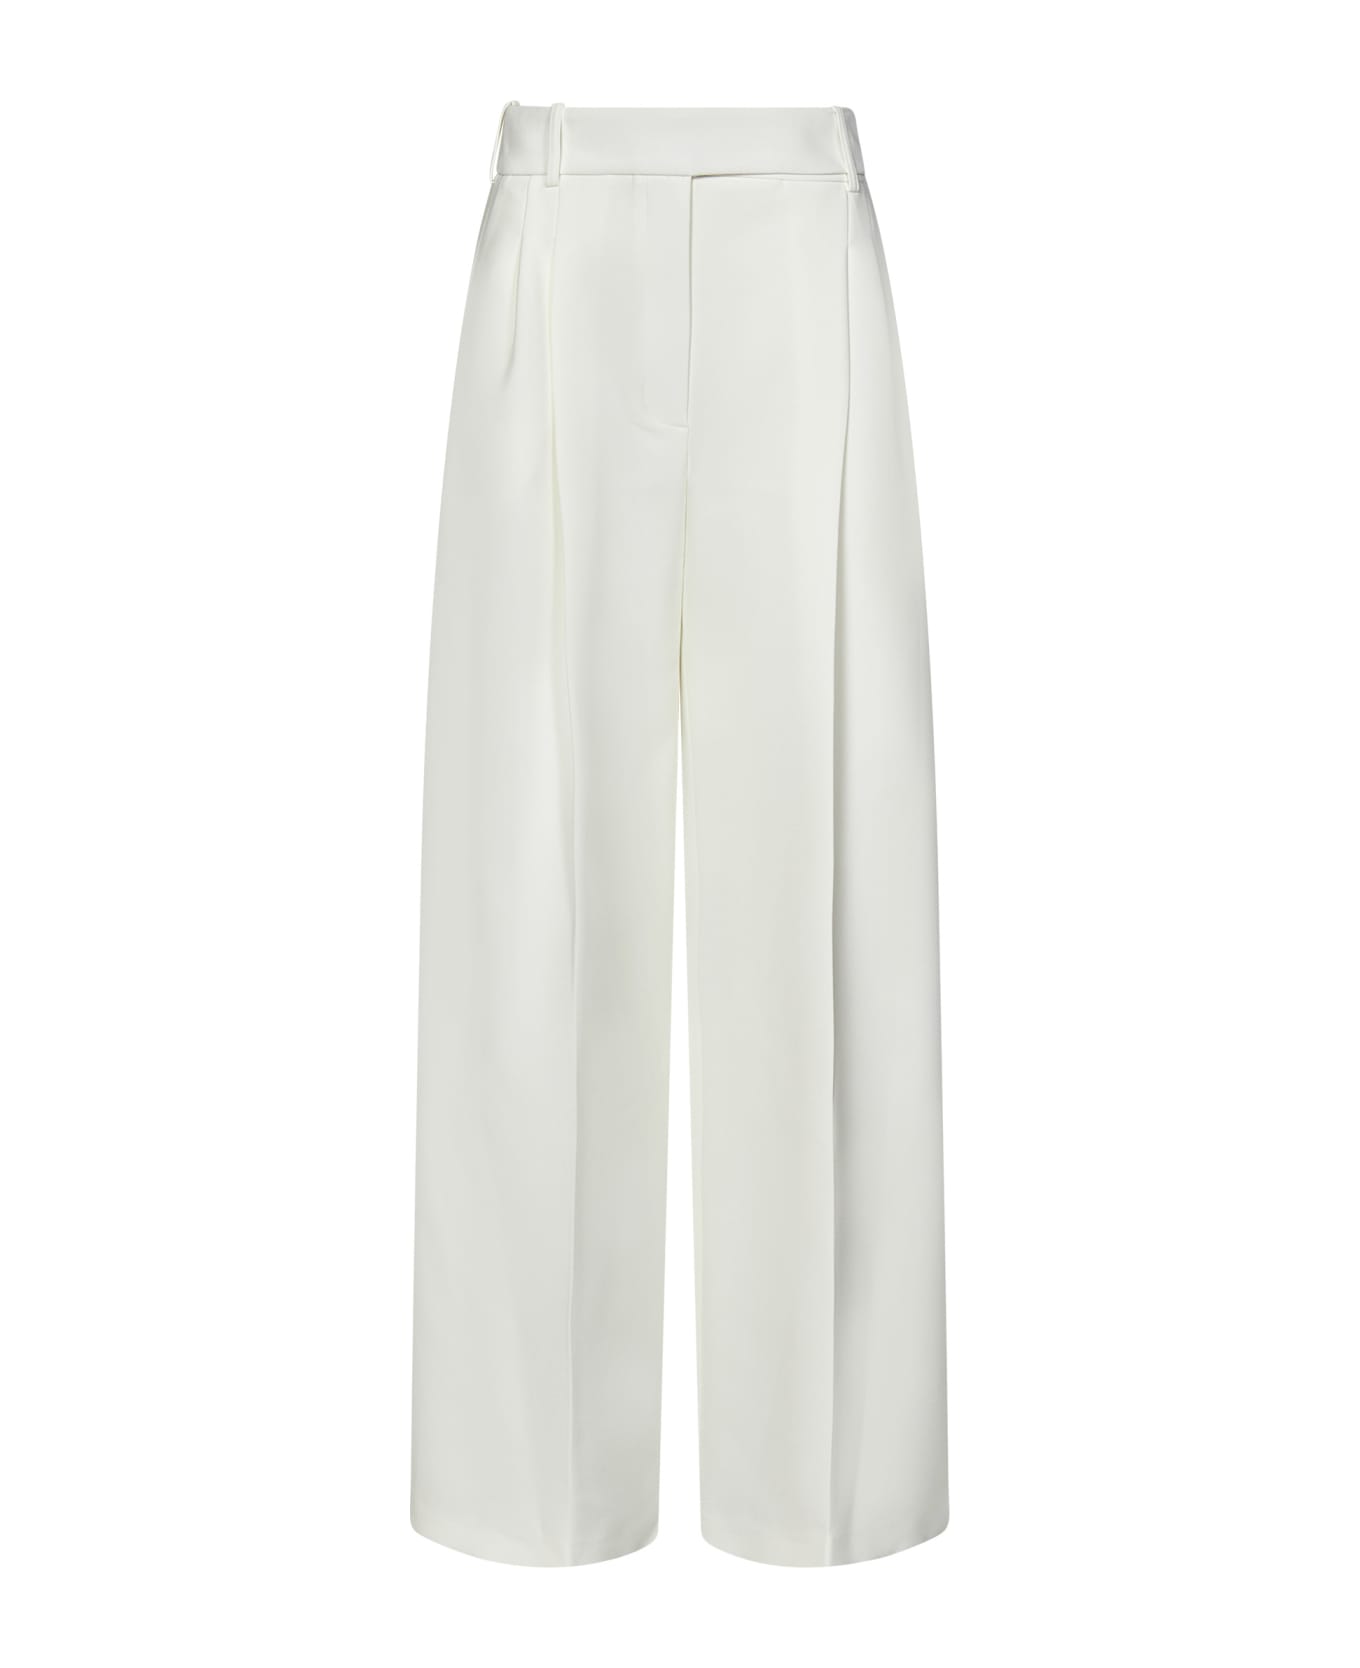 Alexandre Vauthier Trousers - White ボトムス